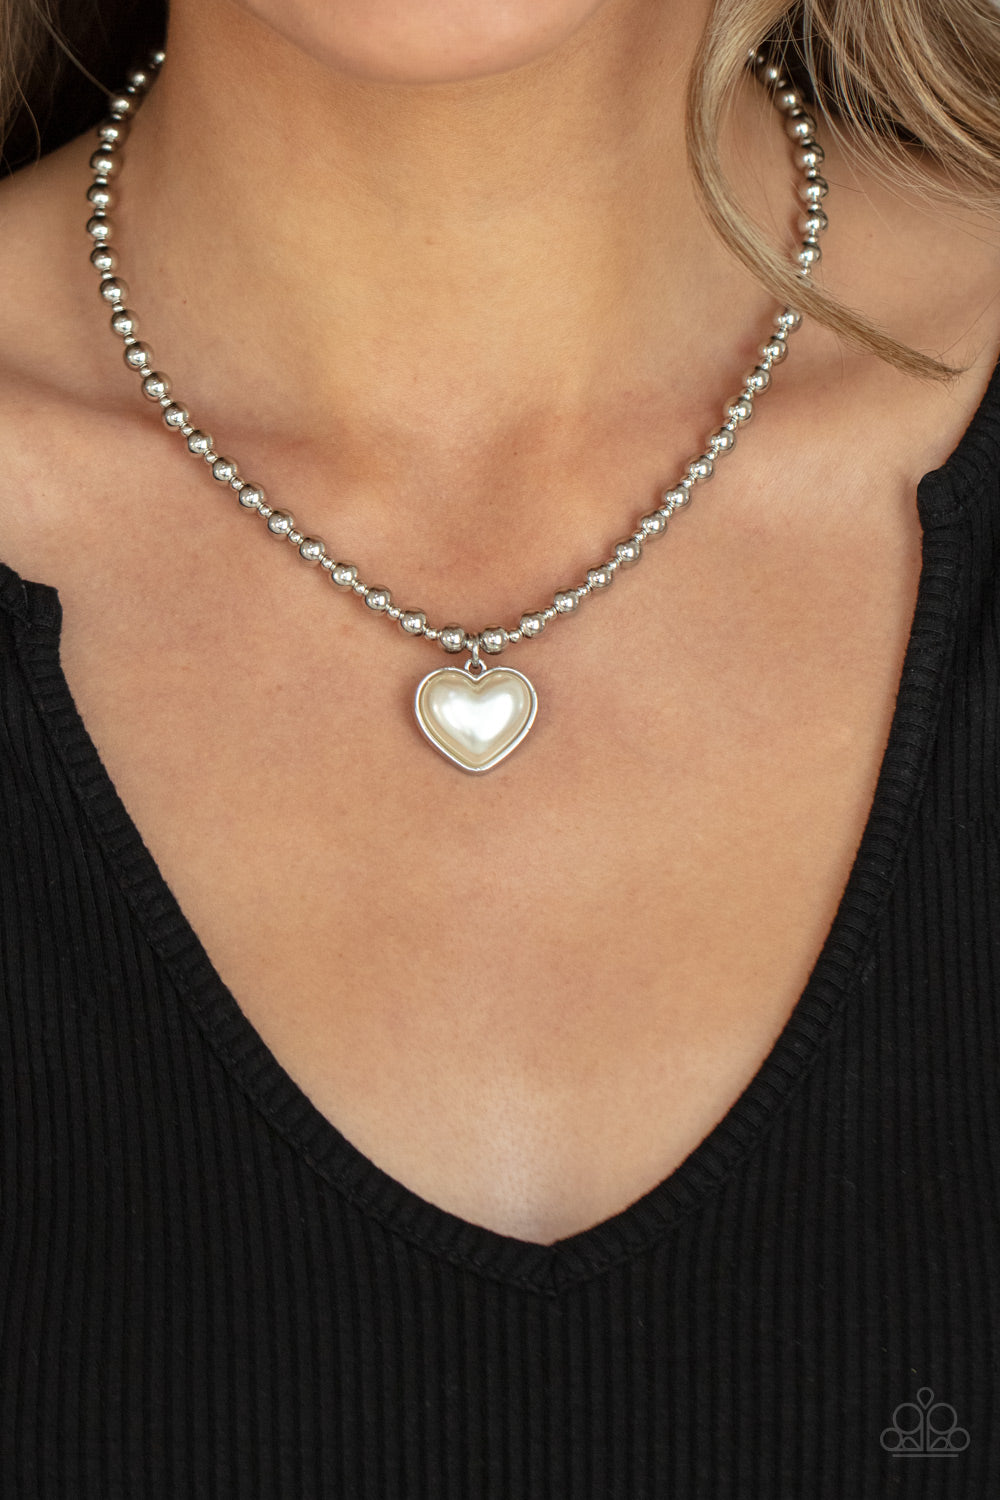 &lt;p&gt;Featuring a pearly white center, a charming heart pendant glides along a strand of silver beads below the collar for a romantic flair. Features an adjustable clasp closure. &lt;/p&gt;

&lt;p&gt;&lt;i&gt;  Sold as one individual necklace. Includes one pair of matching earrings.  &lt;/i&gt;&lt;/p&gt;

